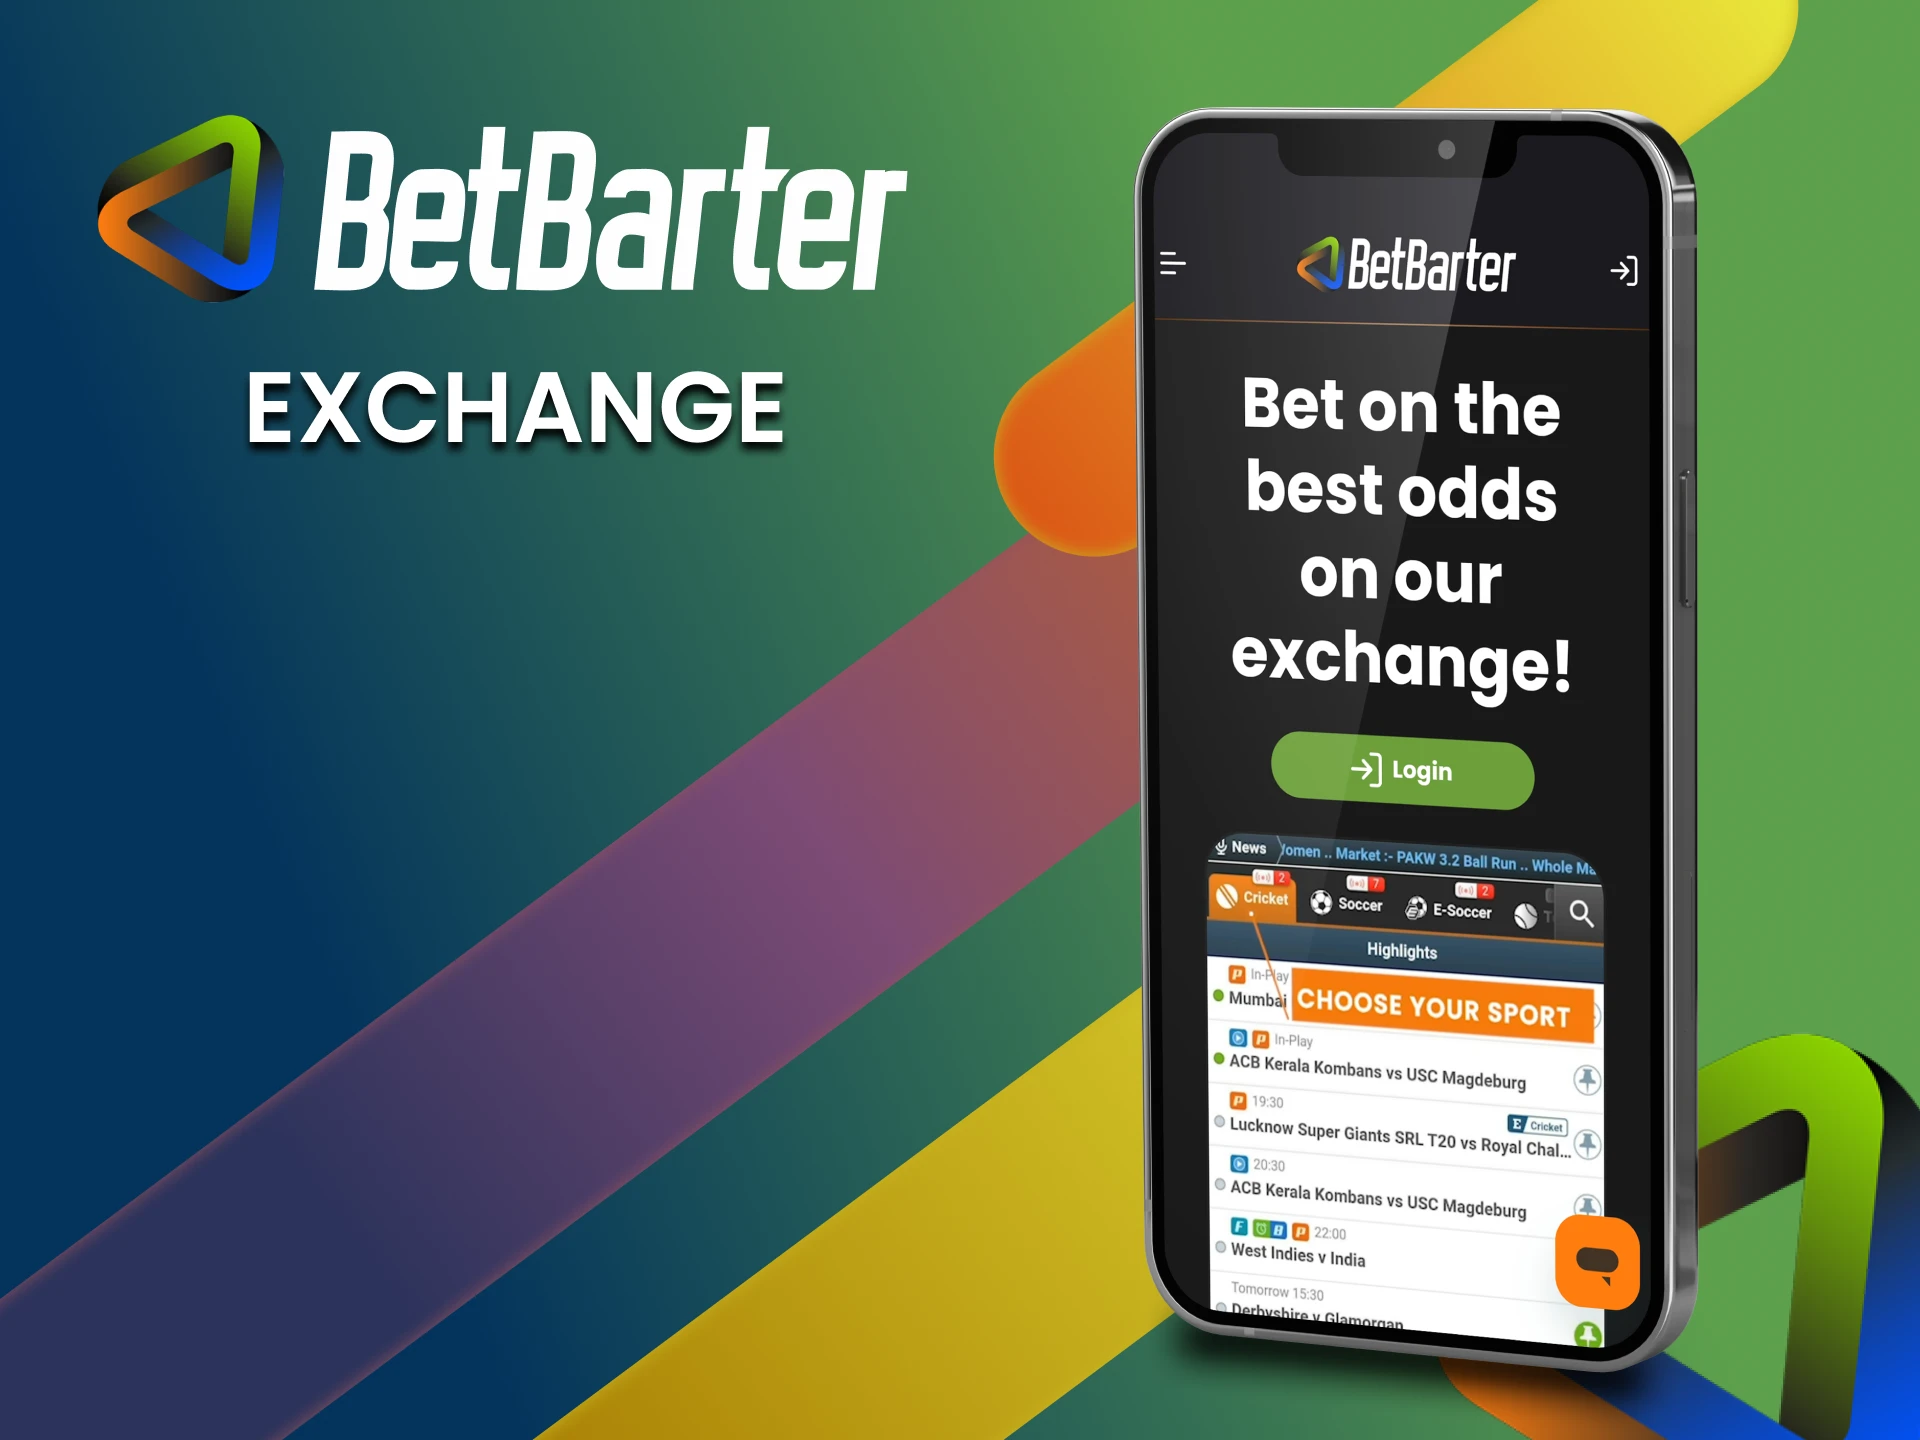 With a good interface, you can bet from the comfort of any convenient location on the BetBarter app.